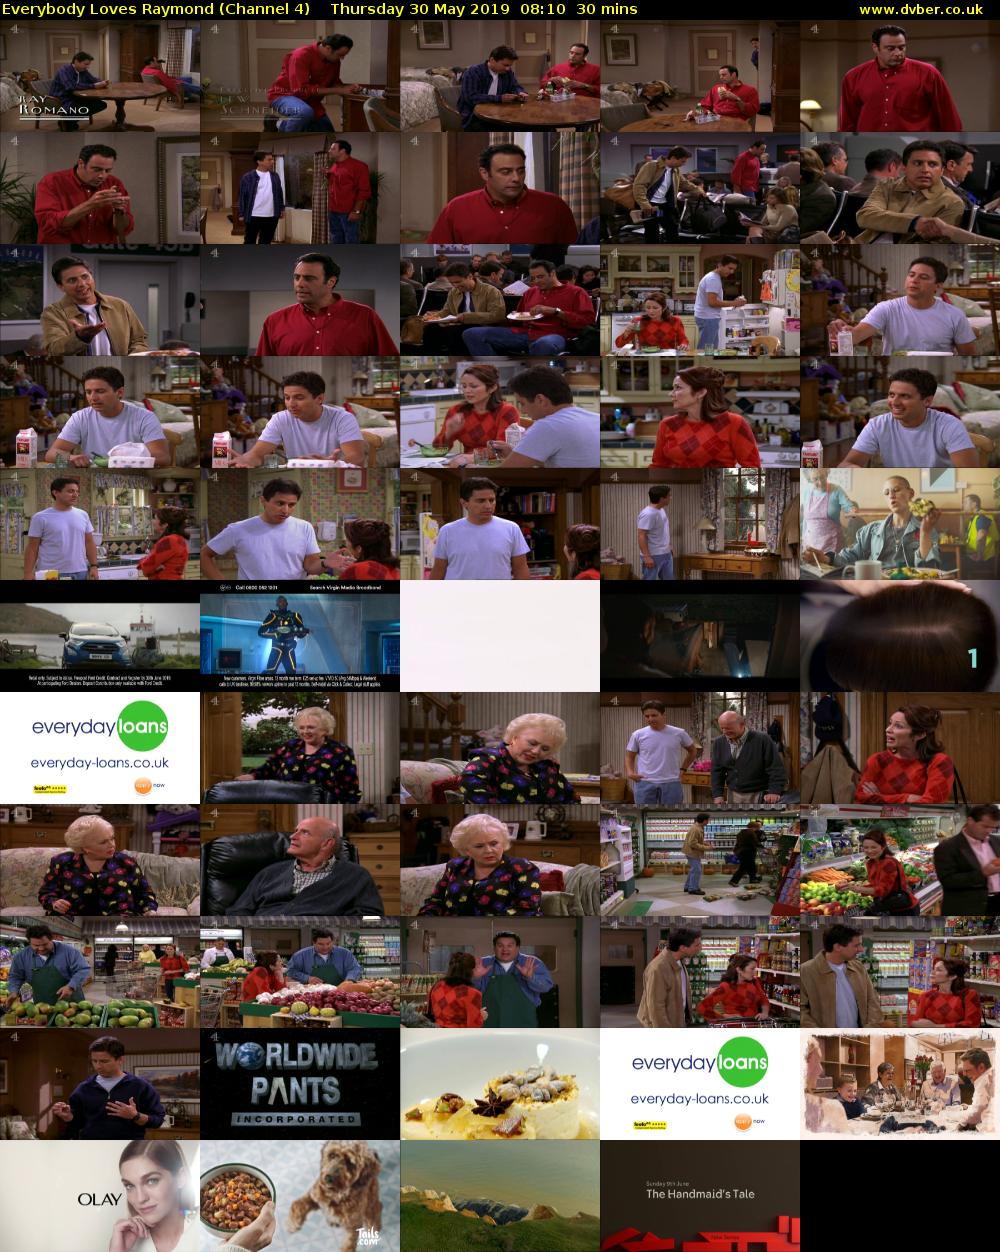 Everybody Loves Raymond (Channel 4) Thursday 30 May 2019 08:10 - 08:40